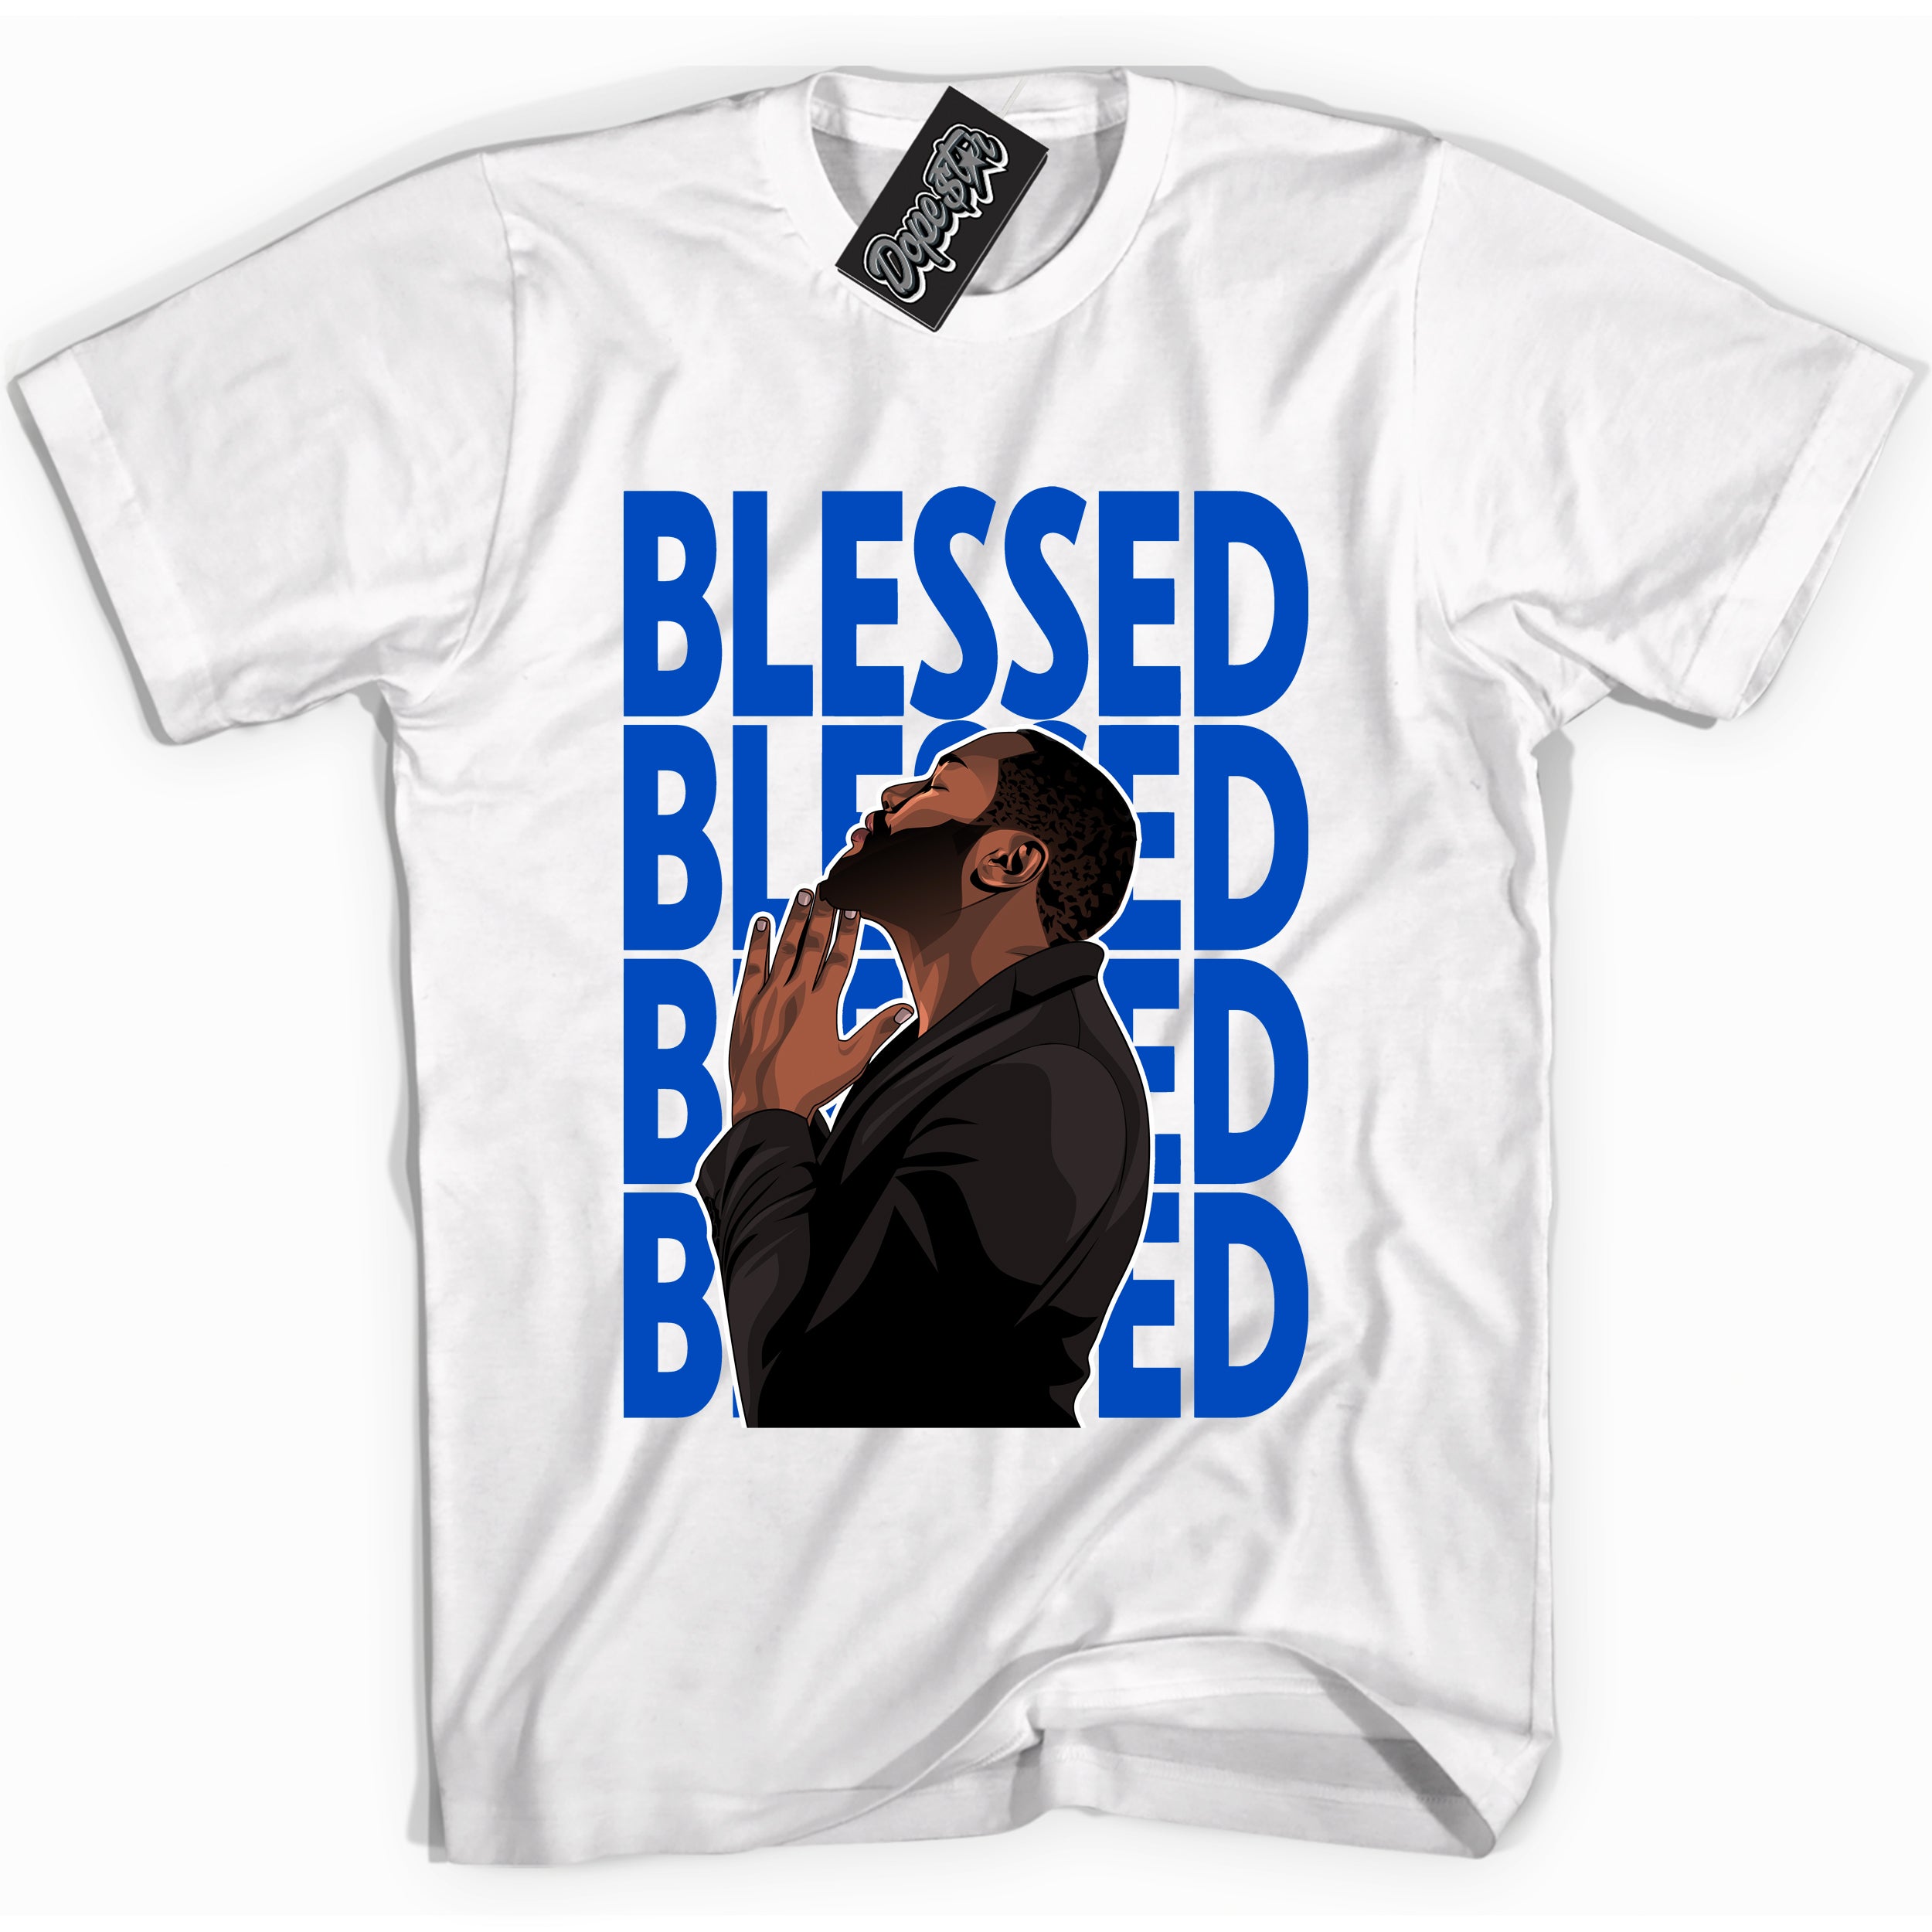 Cool White graphic tee with God Blessed print, that perfectly matches OG Royal Reimagined 1s sneakers 